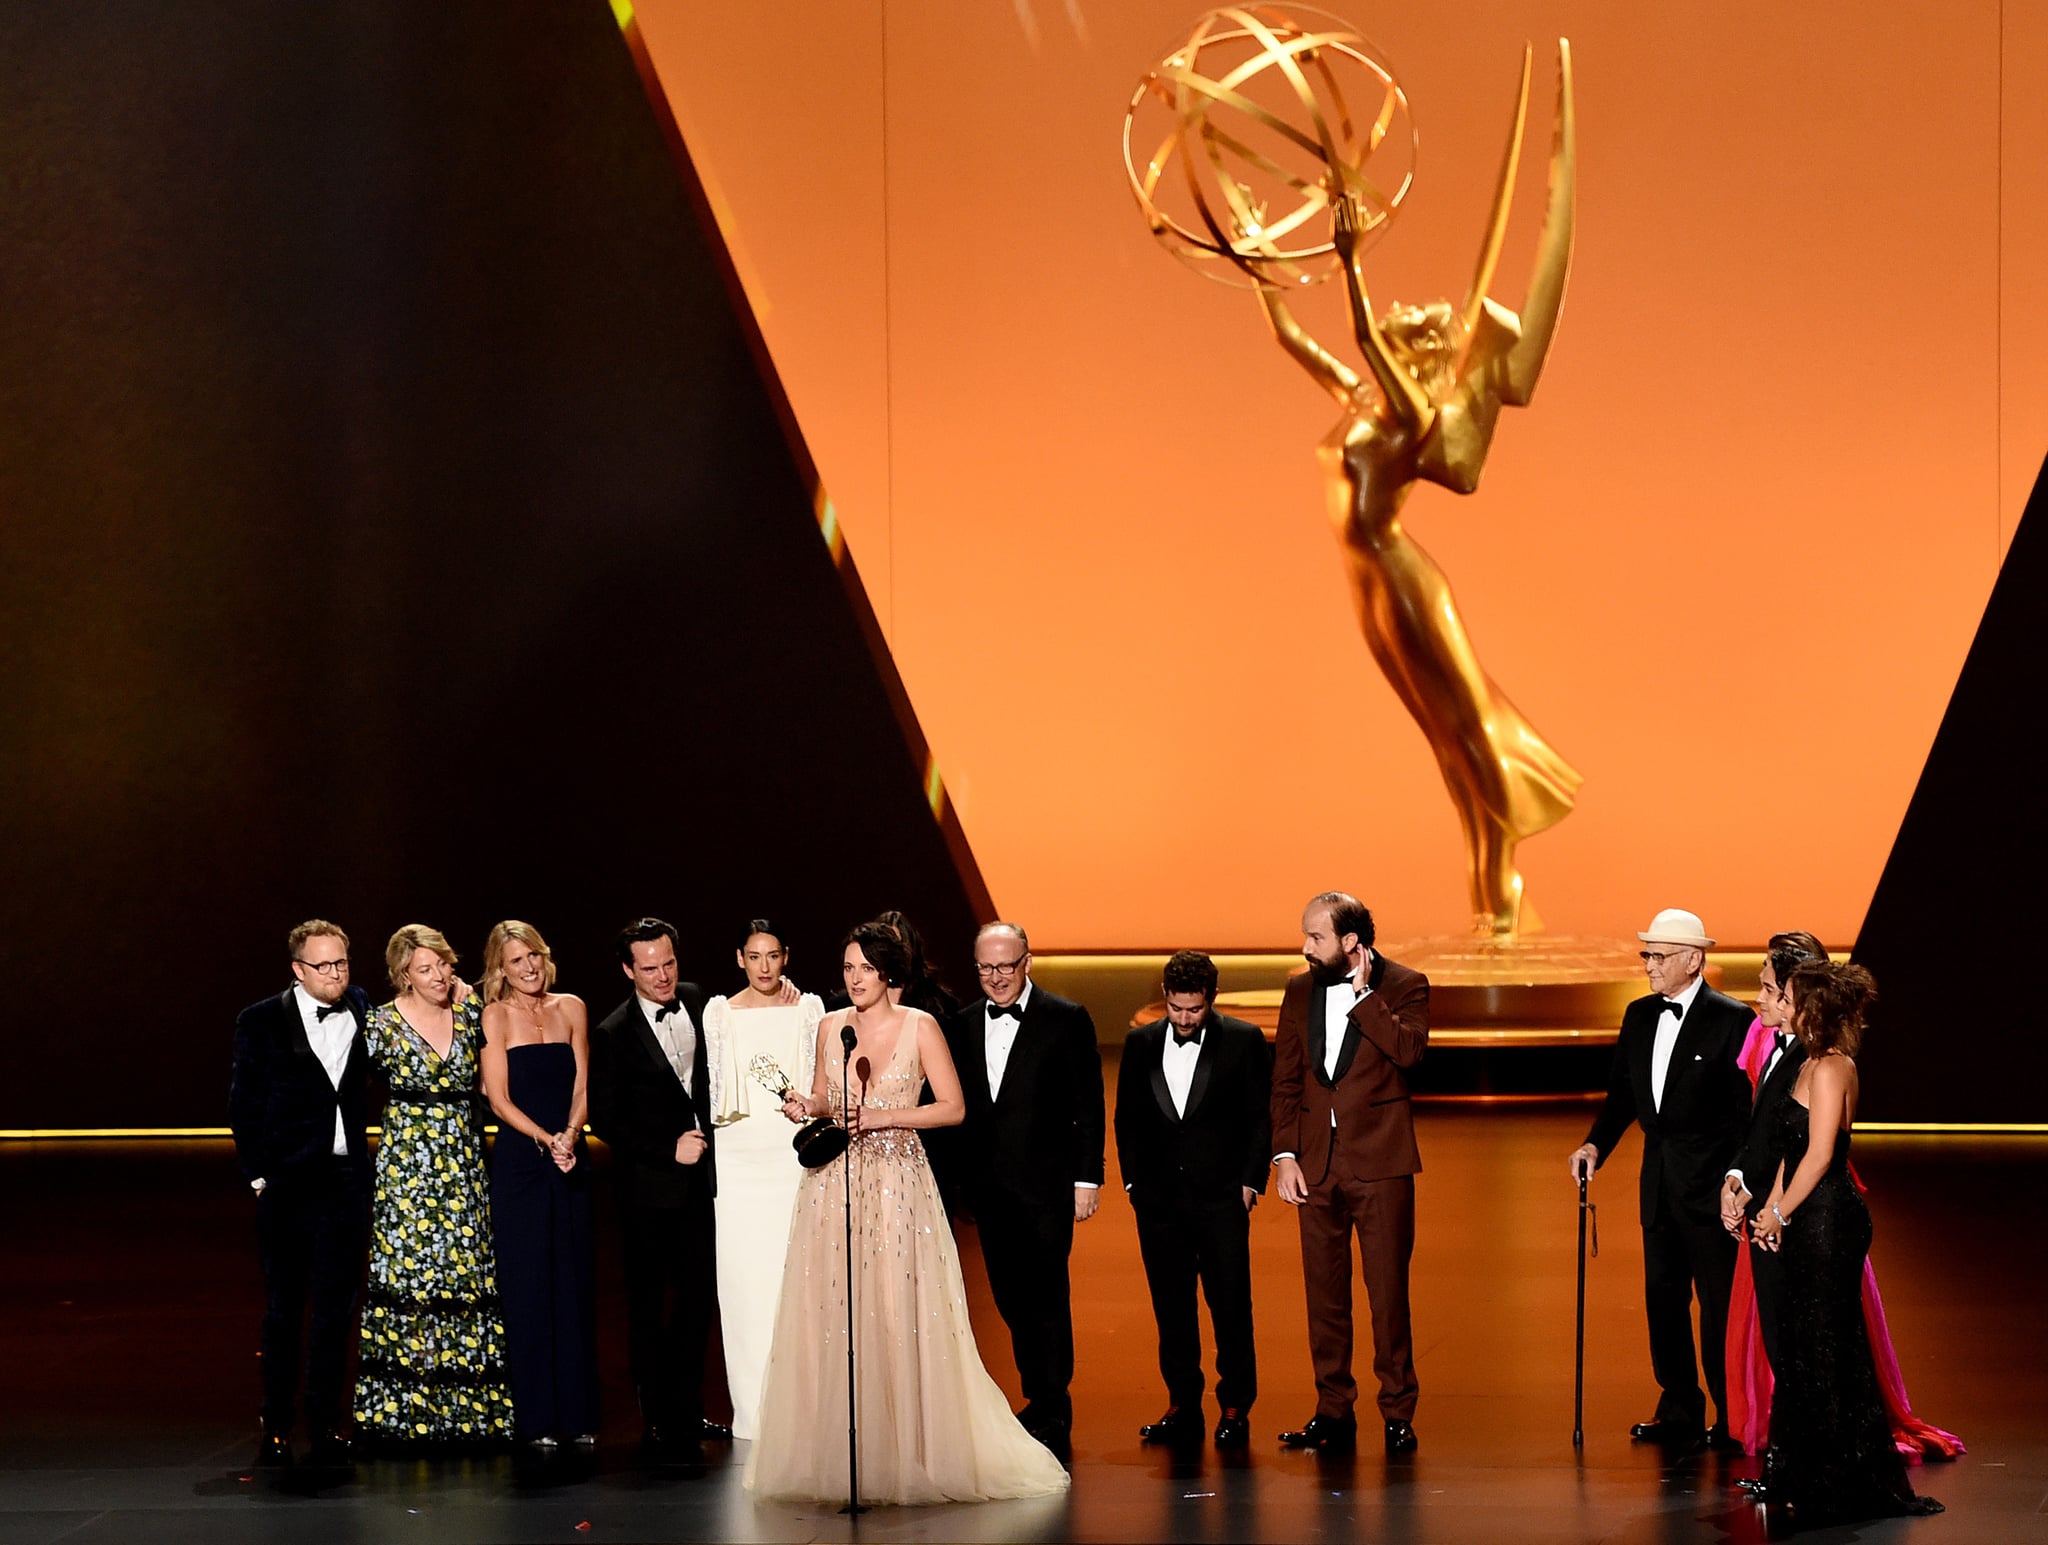 LOS ANGELES, CALIFORNIA - SEPTEMBER 22: Phoebe Waller-Bridge (speaking) and fellow cast and crew members of 'Fleabag' accept the Outstanding Comedy Series award onstage during the 71st Emmy Awards at Microsoft Theatre on September 22, 2019 in Los Angeles, California. (Photo by Kevin Winter/Getty Images)